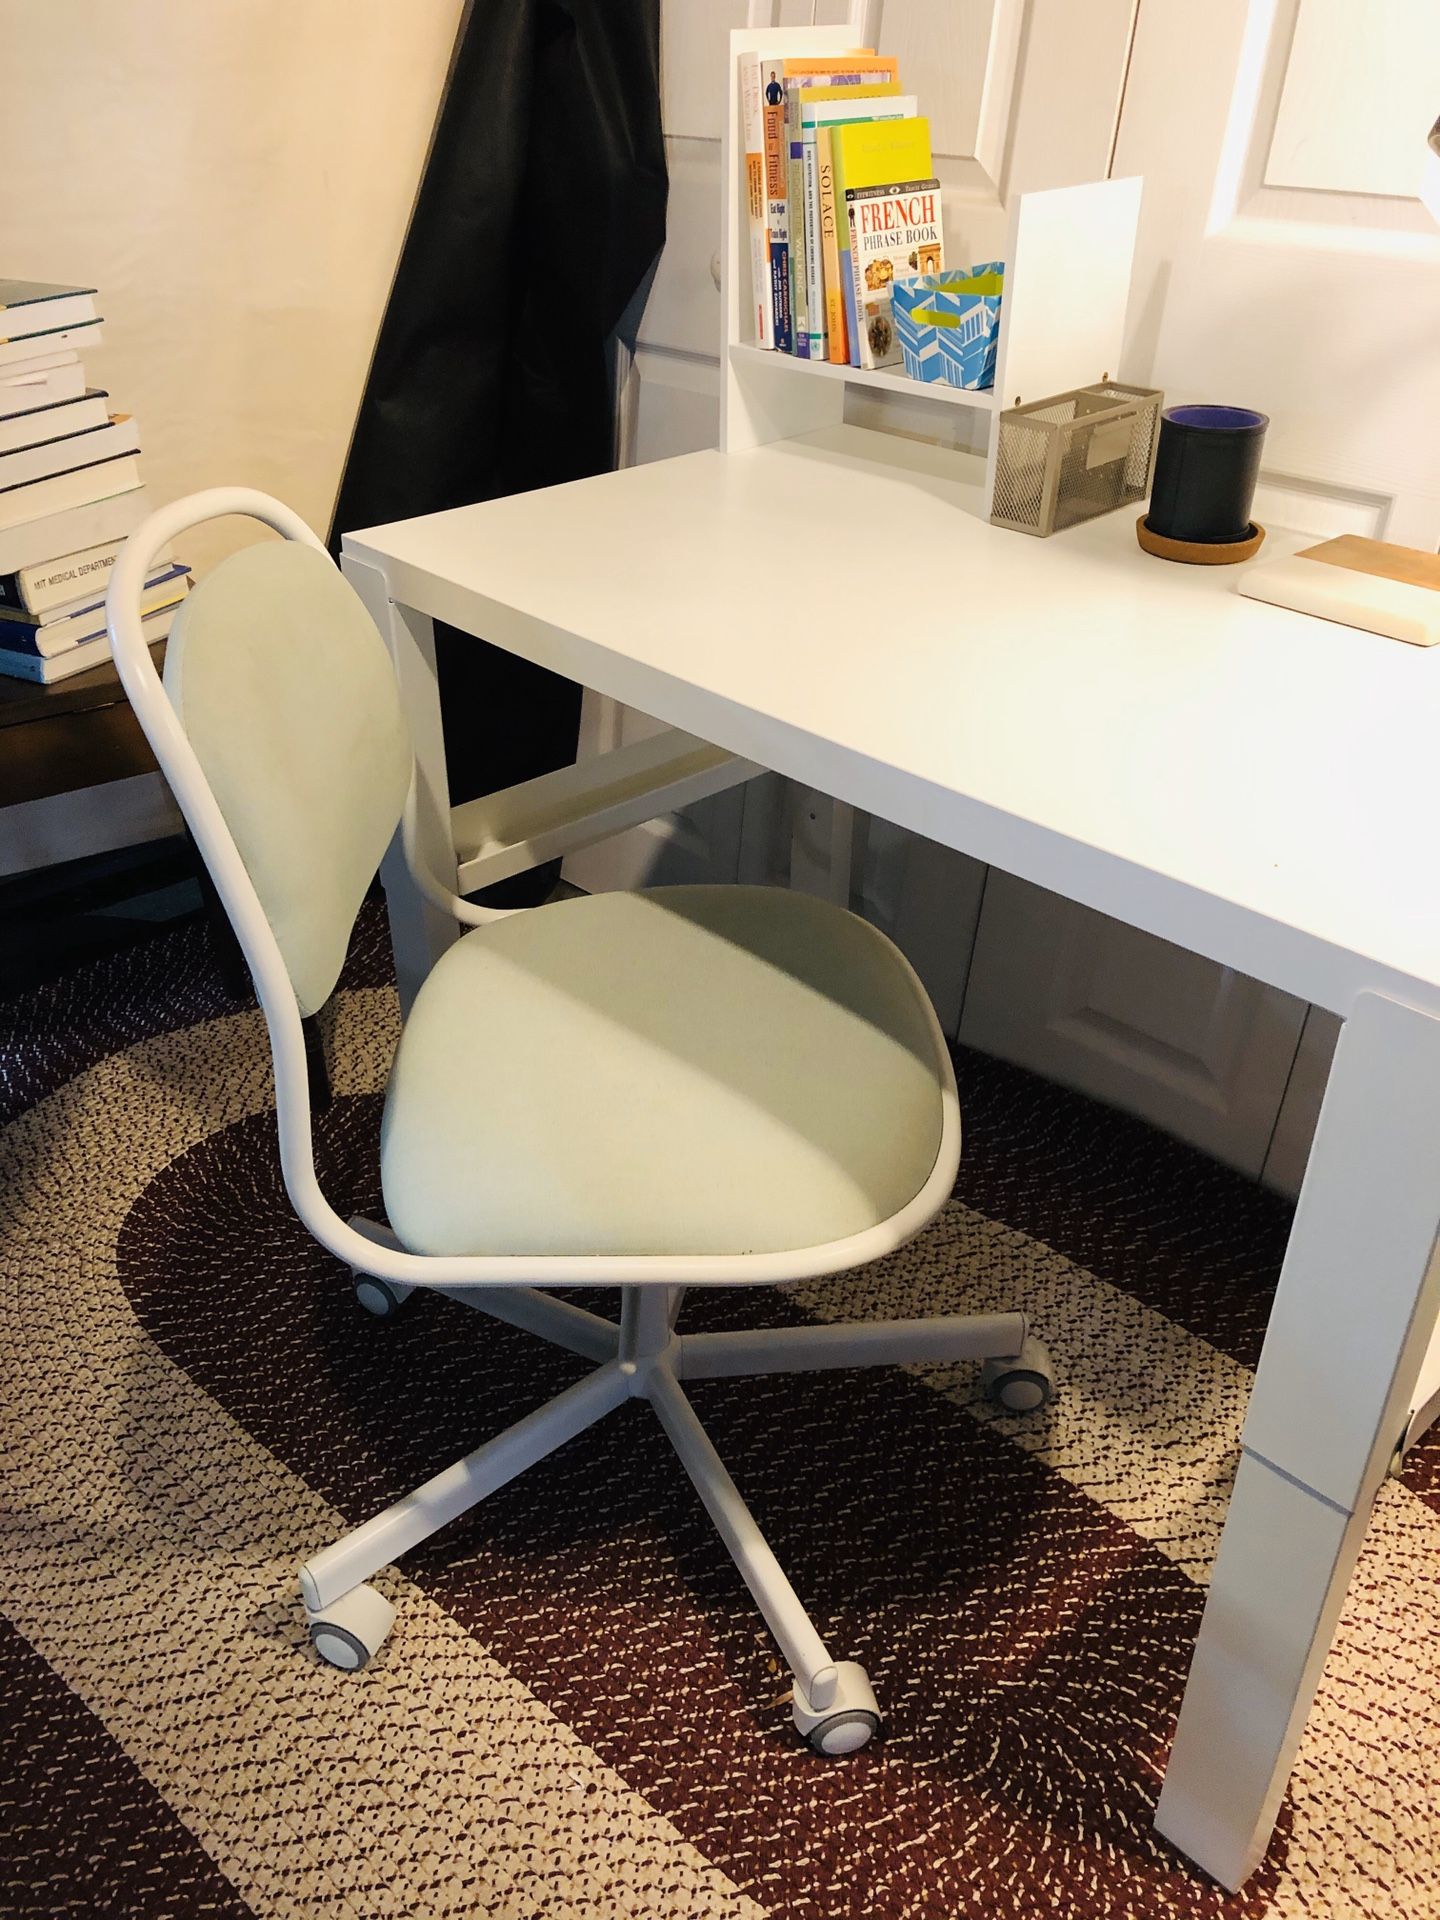 student desk set / with chair and more